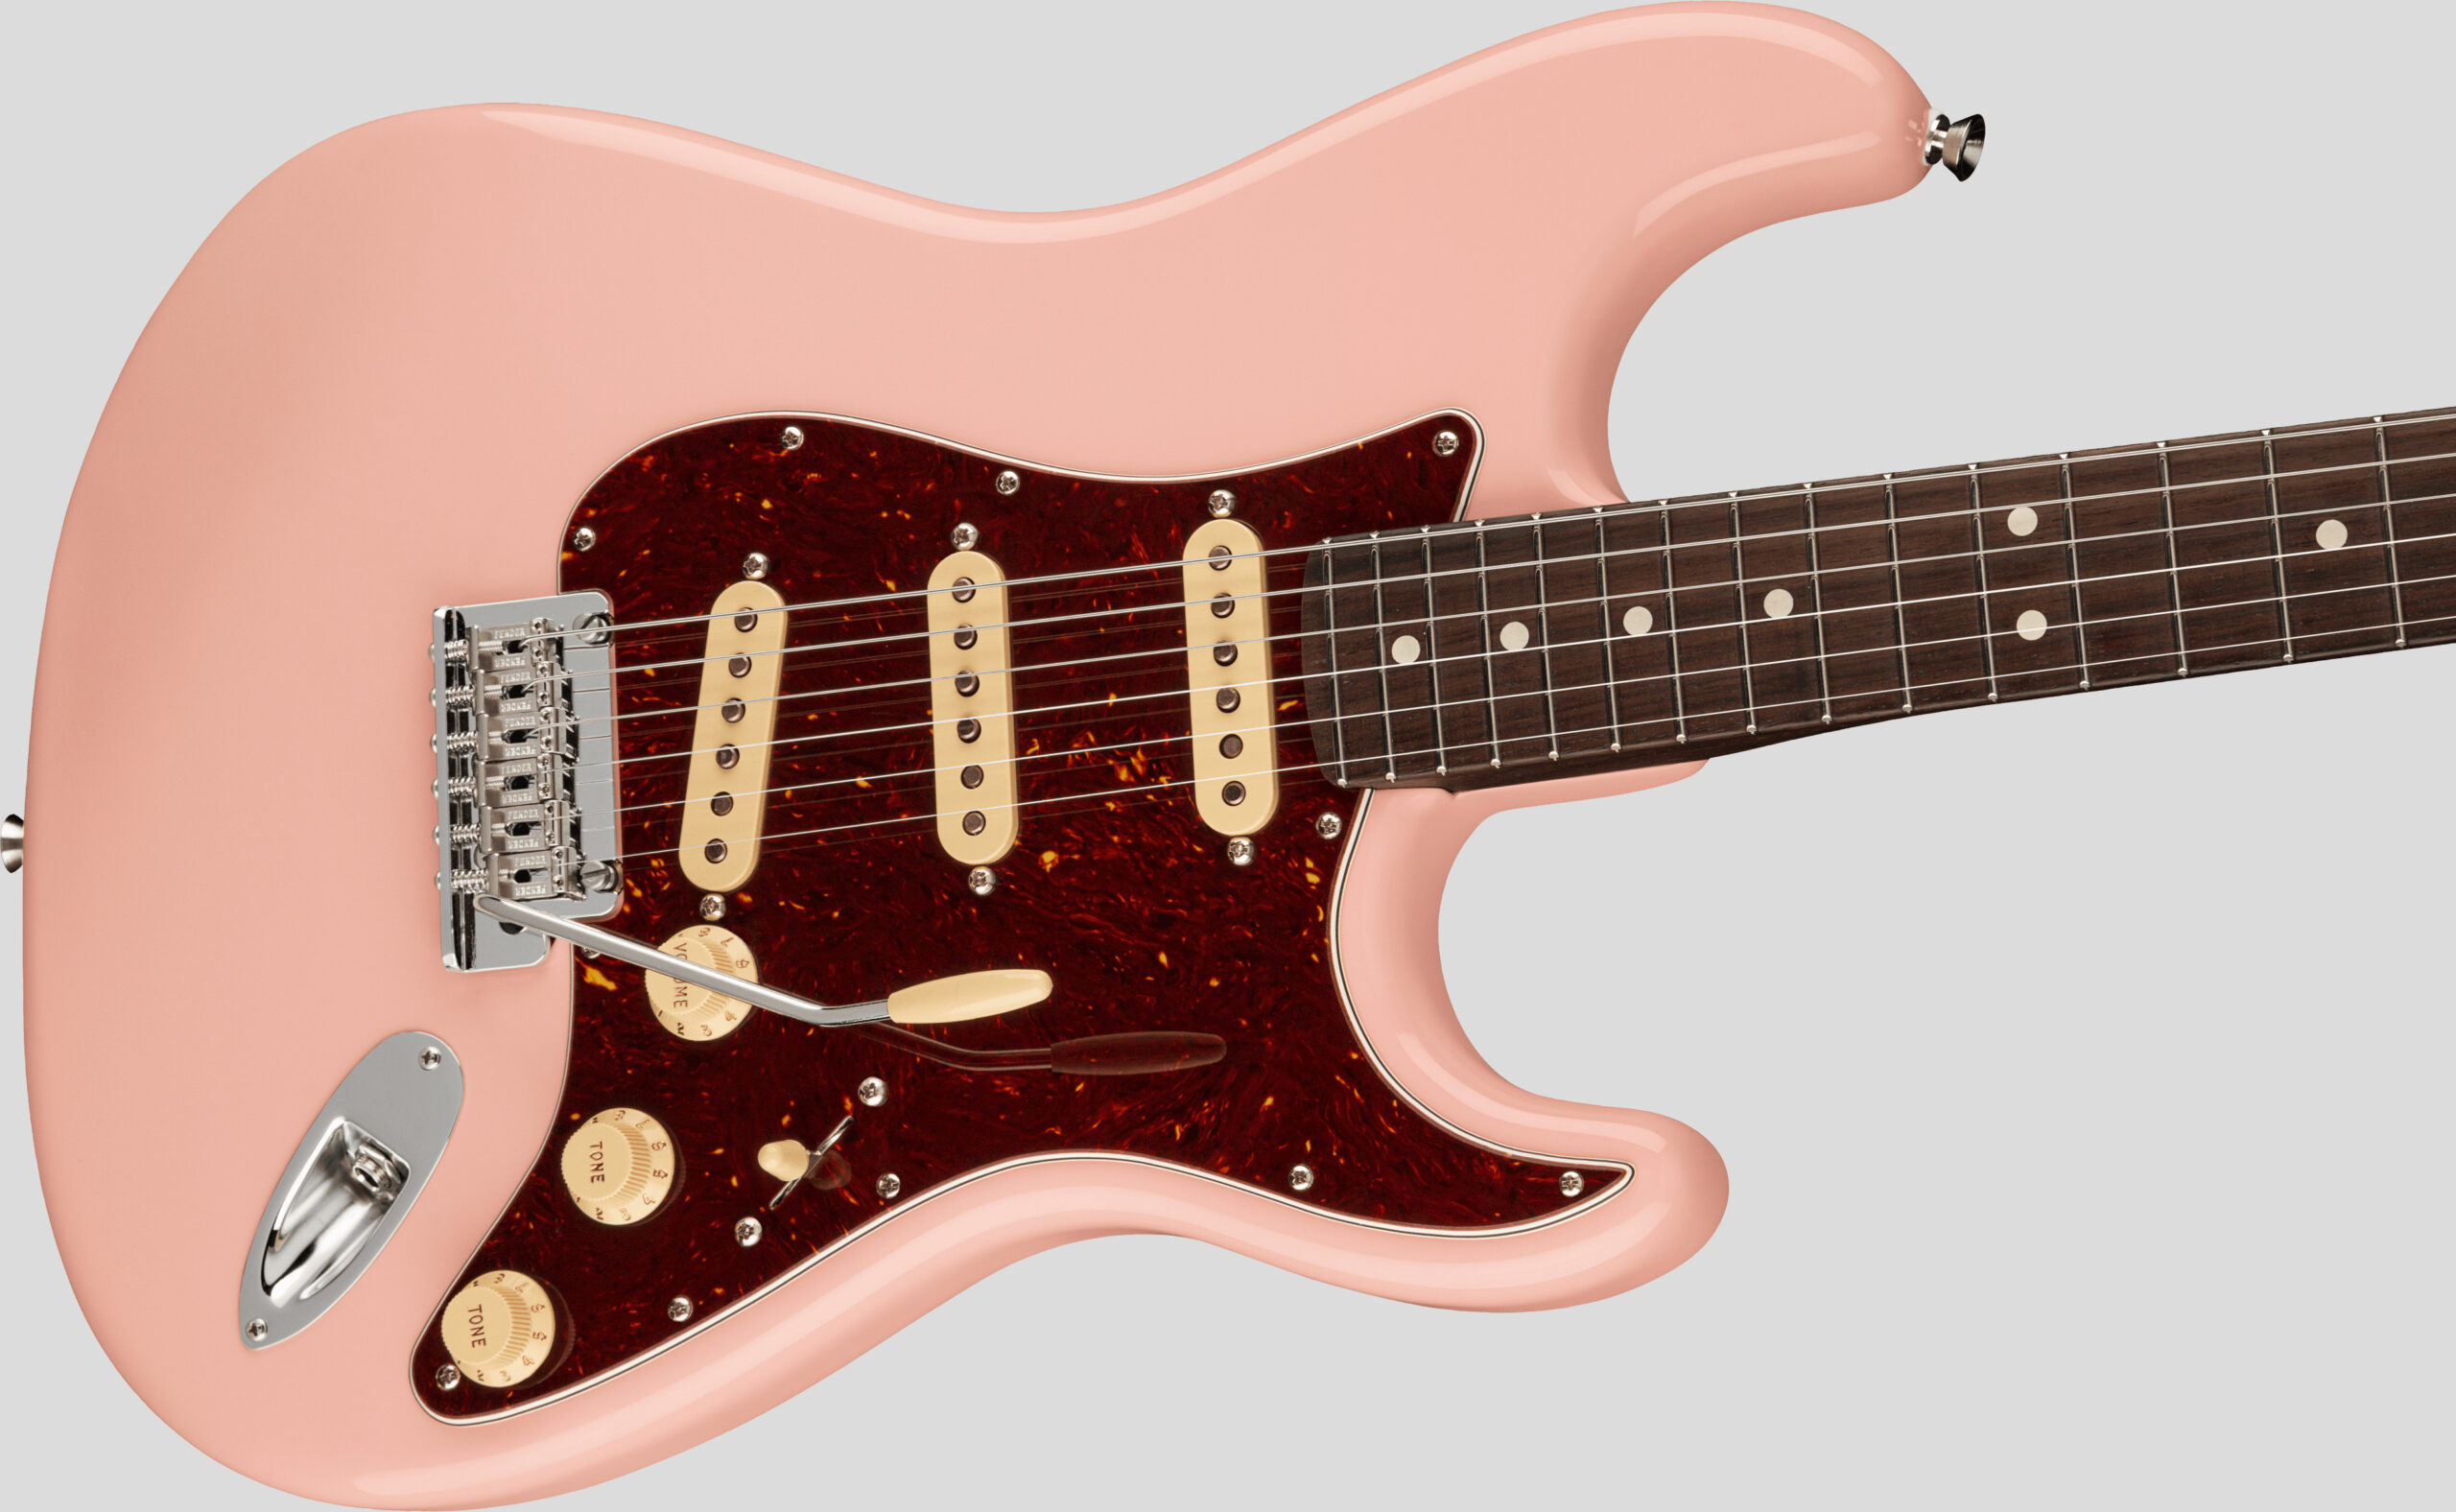 Fender Limited Edition American Professional II Stratocaster Rosewood Neck Shell Pink 3